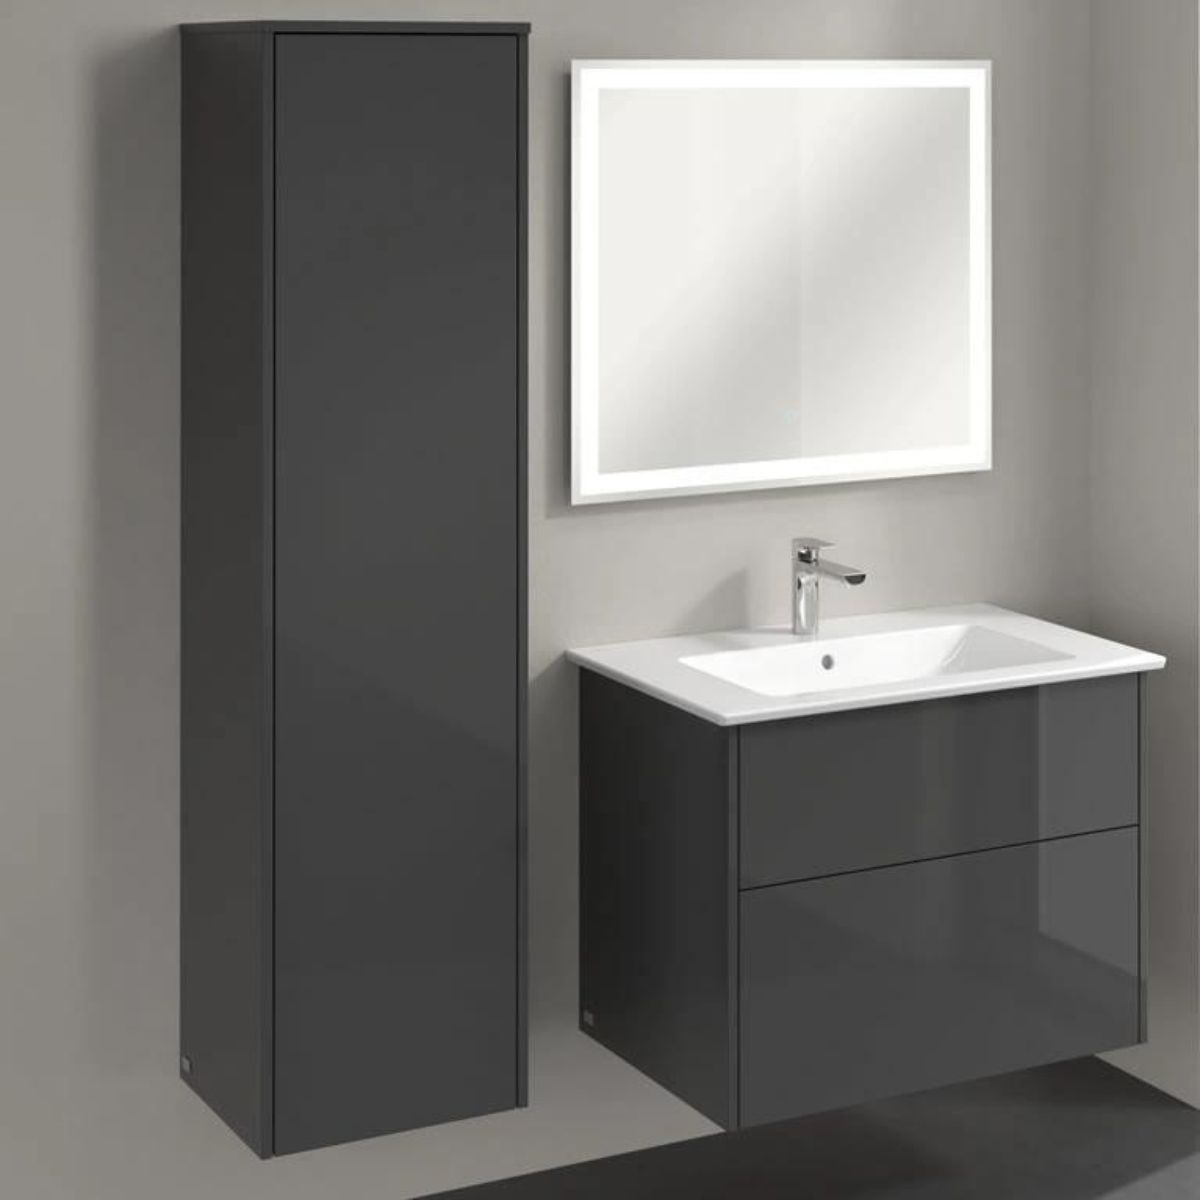 Villeroy and Boch Finero Tall Wall Mounted Cabinet in Glossy Grey | UK ...